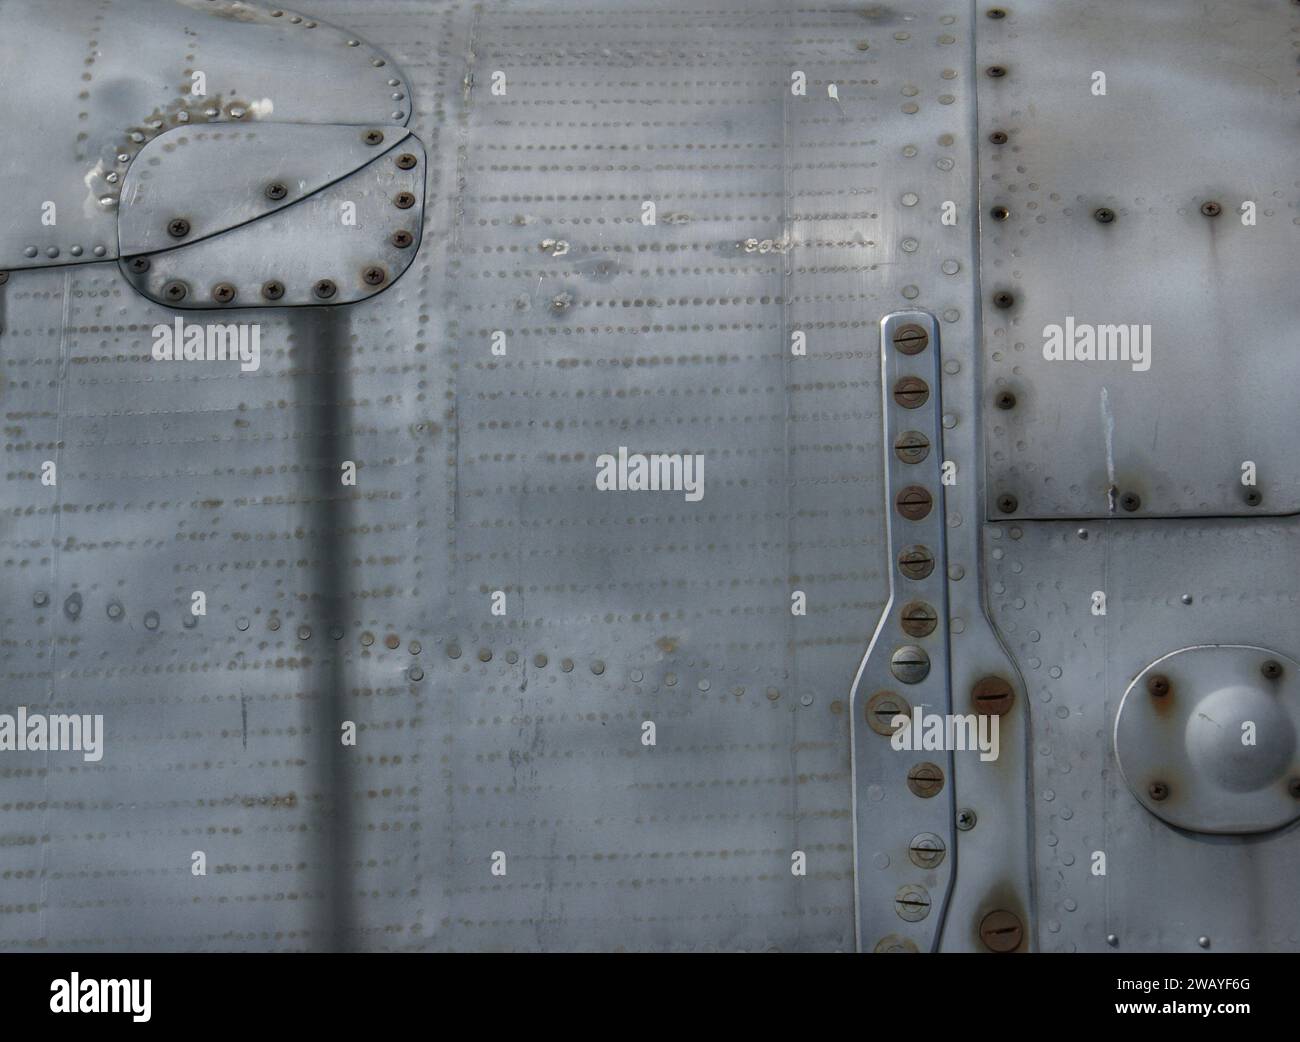 Fragment of an old metal fuselage. Metallic background with screws and rivets. Stock Photo